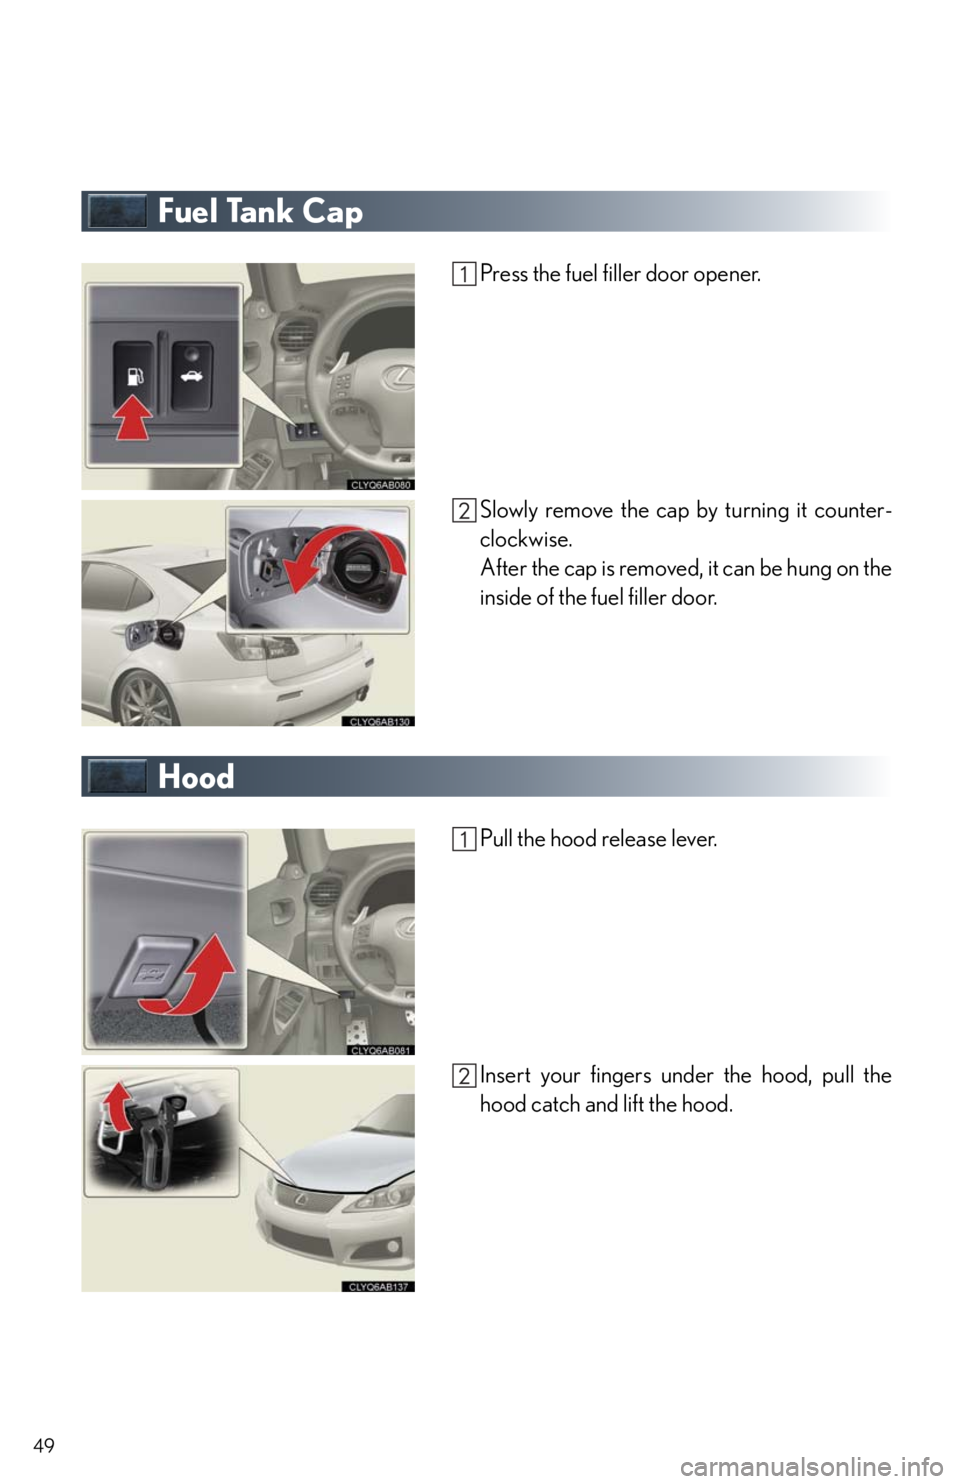 Lexus IS F 2011  Instrument Cluster / LEXUS 2011 IS F OWNERS MANUAL QUICK GUIDE (OM53A11U) 49
Fuel Tank Cap
Press the fuel filler door opener.
Slowly remove the cap by turning it counter-
clockwise.
After the cap is removed, it can be hung on the
inside of the fuel filler door.
Hood
Pull th